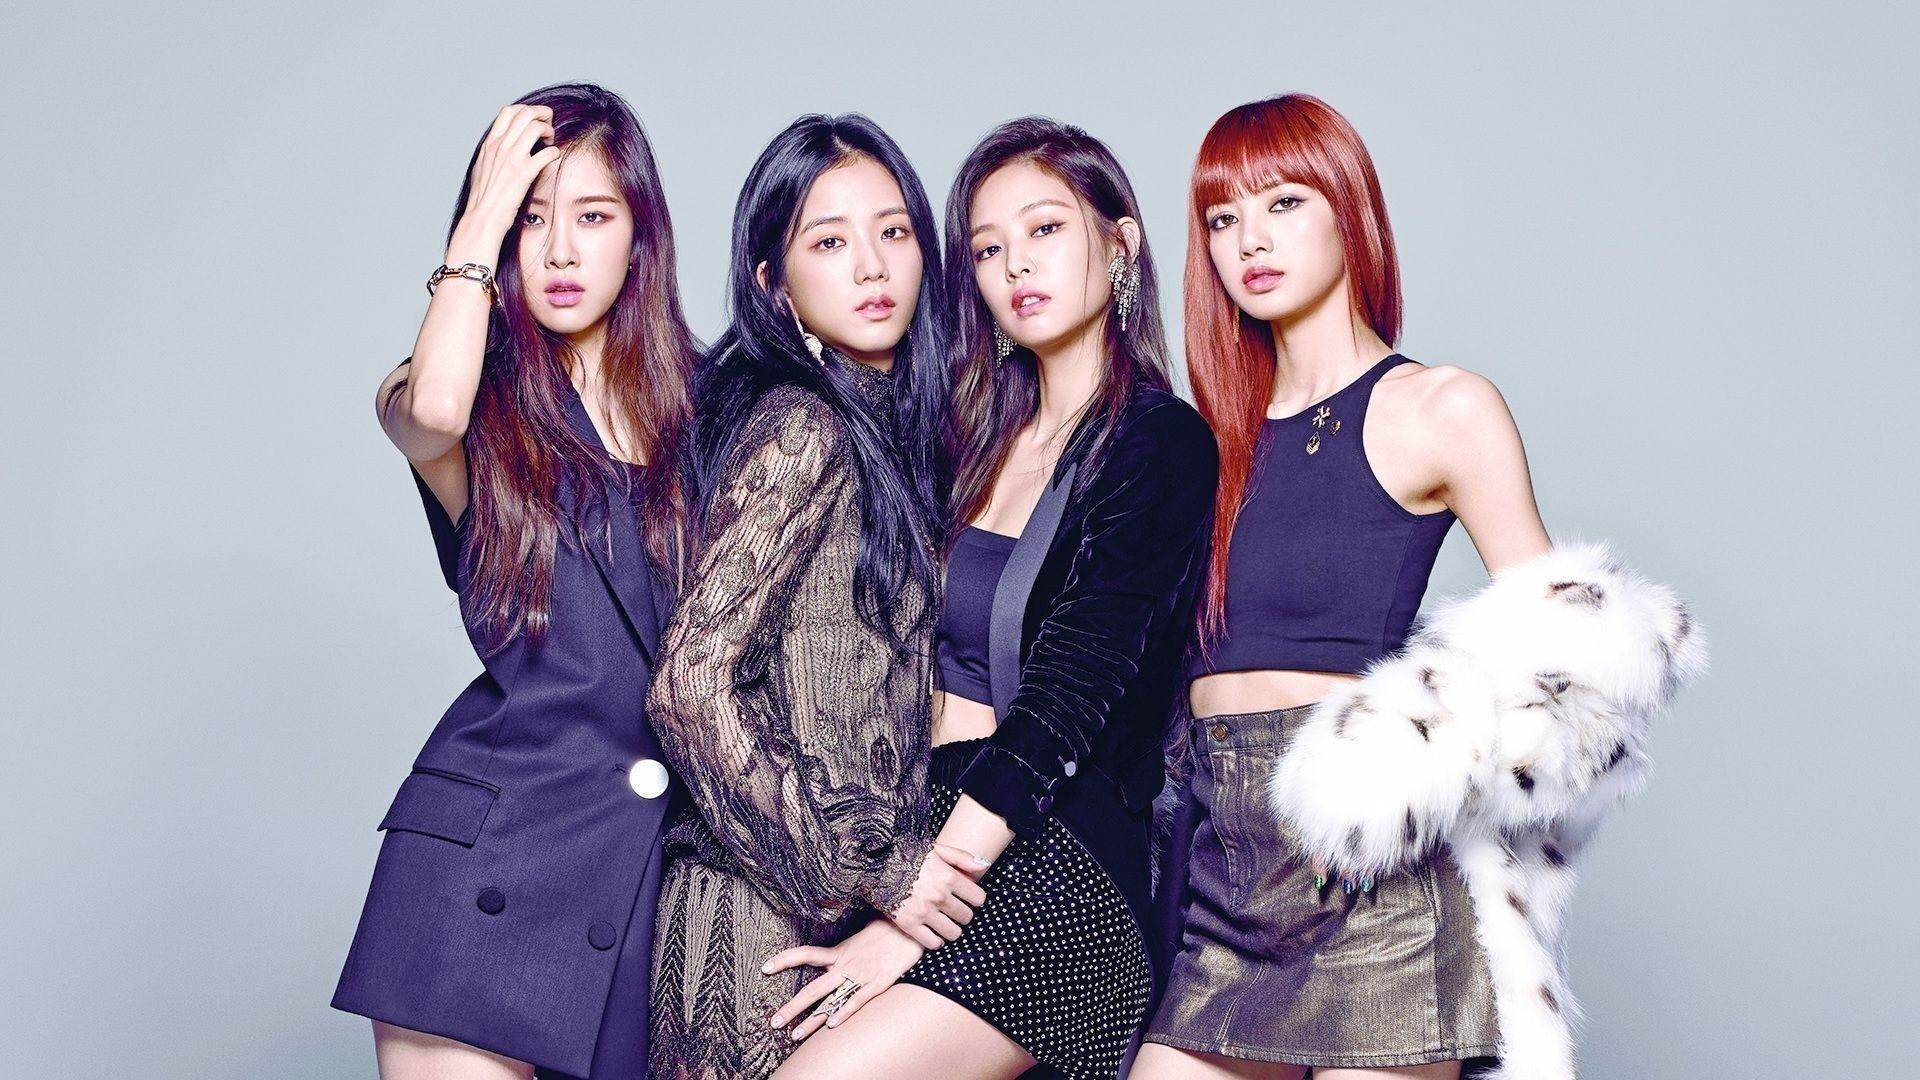 Blackpink Pc Wallpapers - Top Free Blackpink Pc Backgrounds